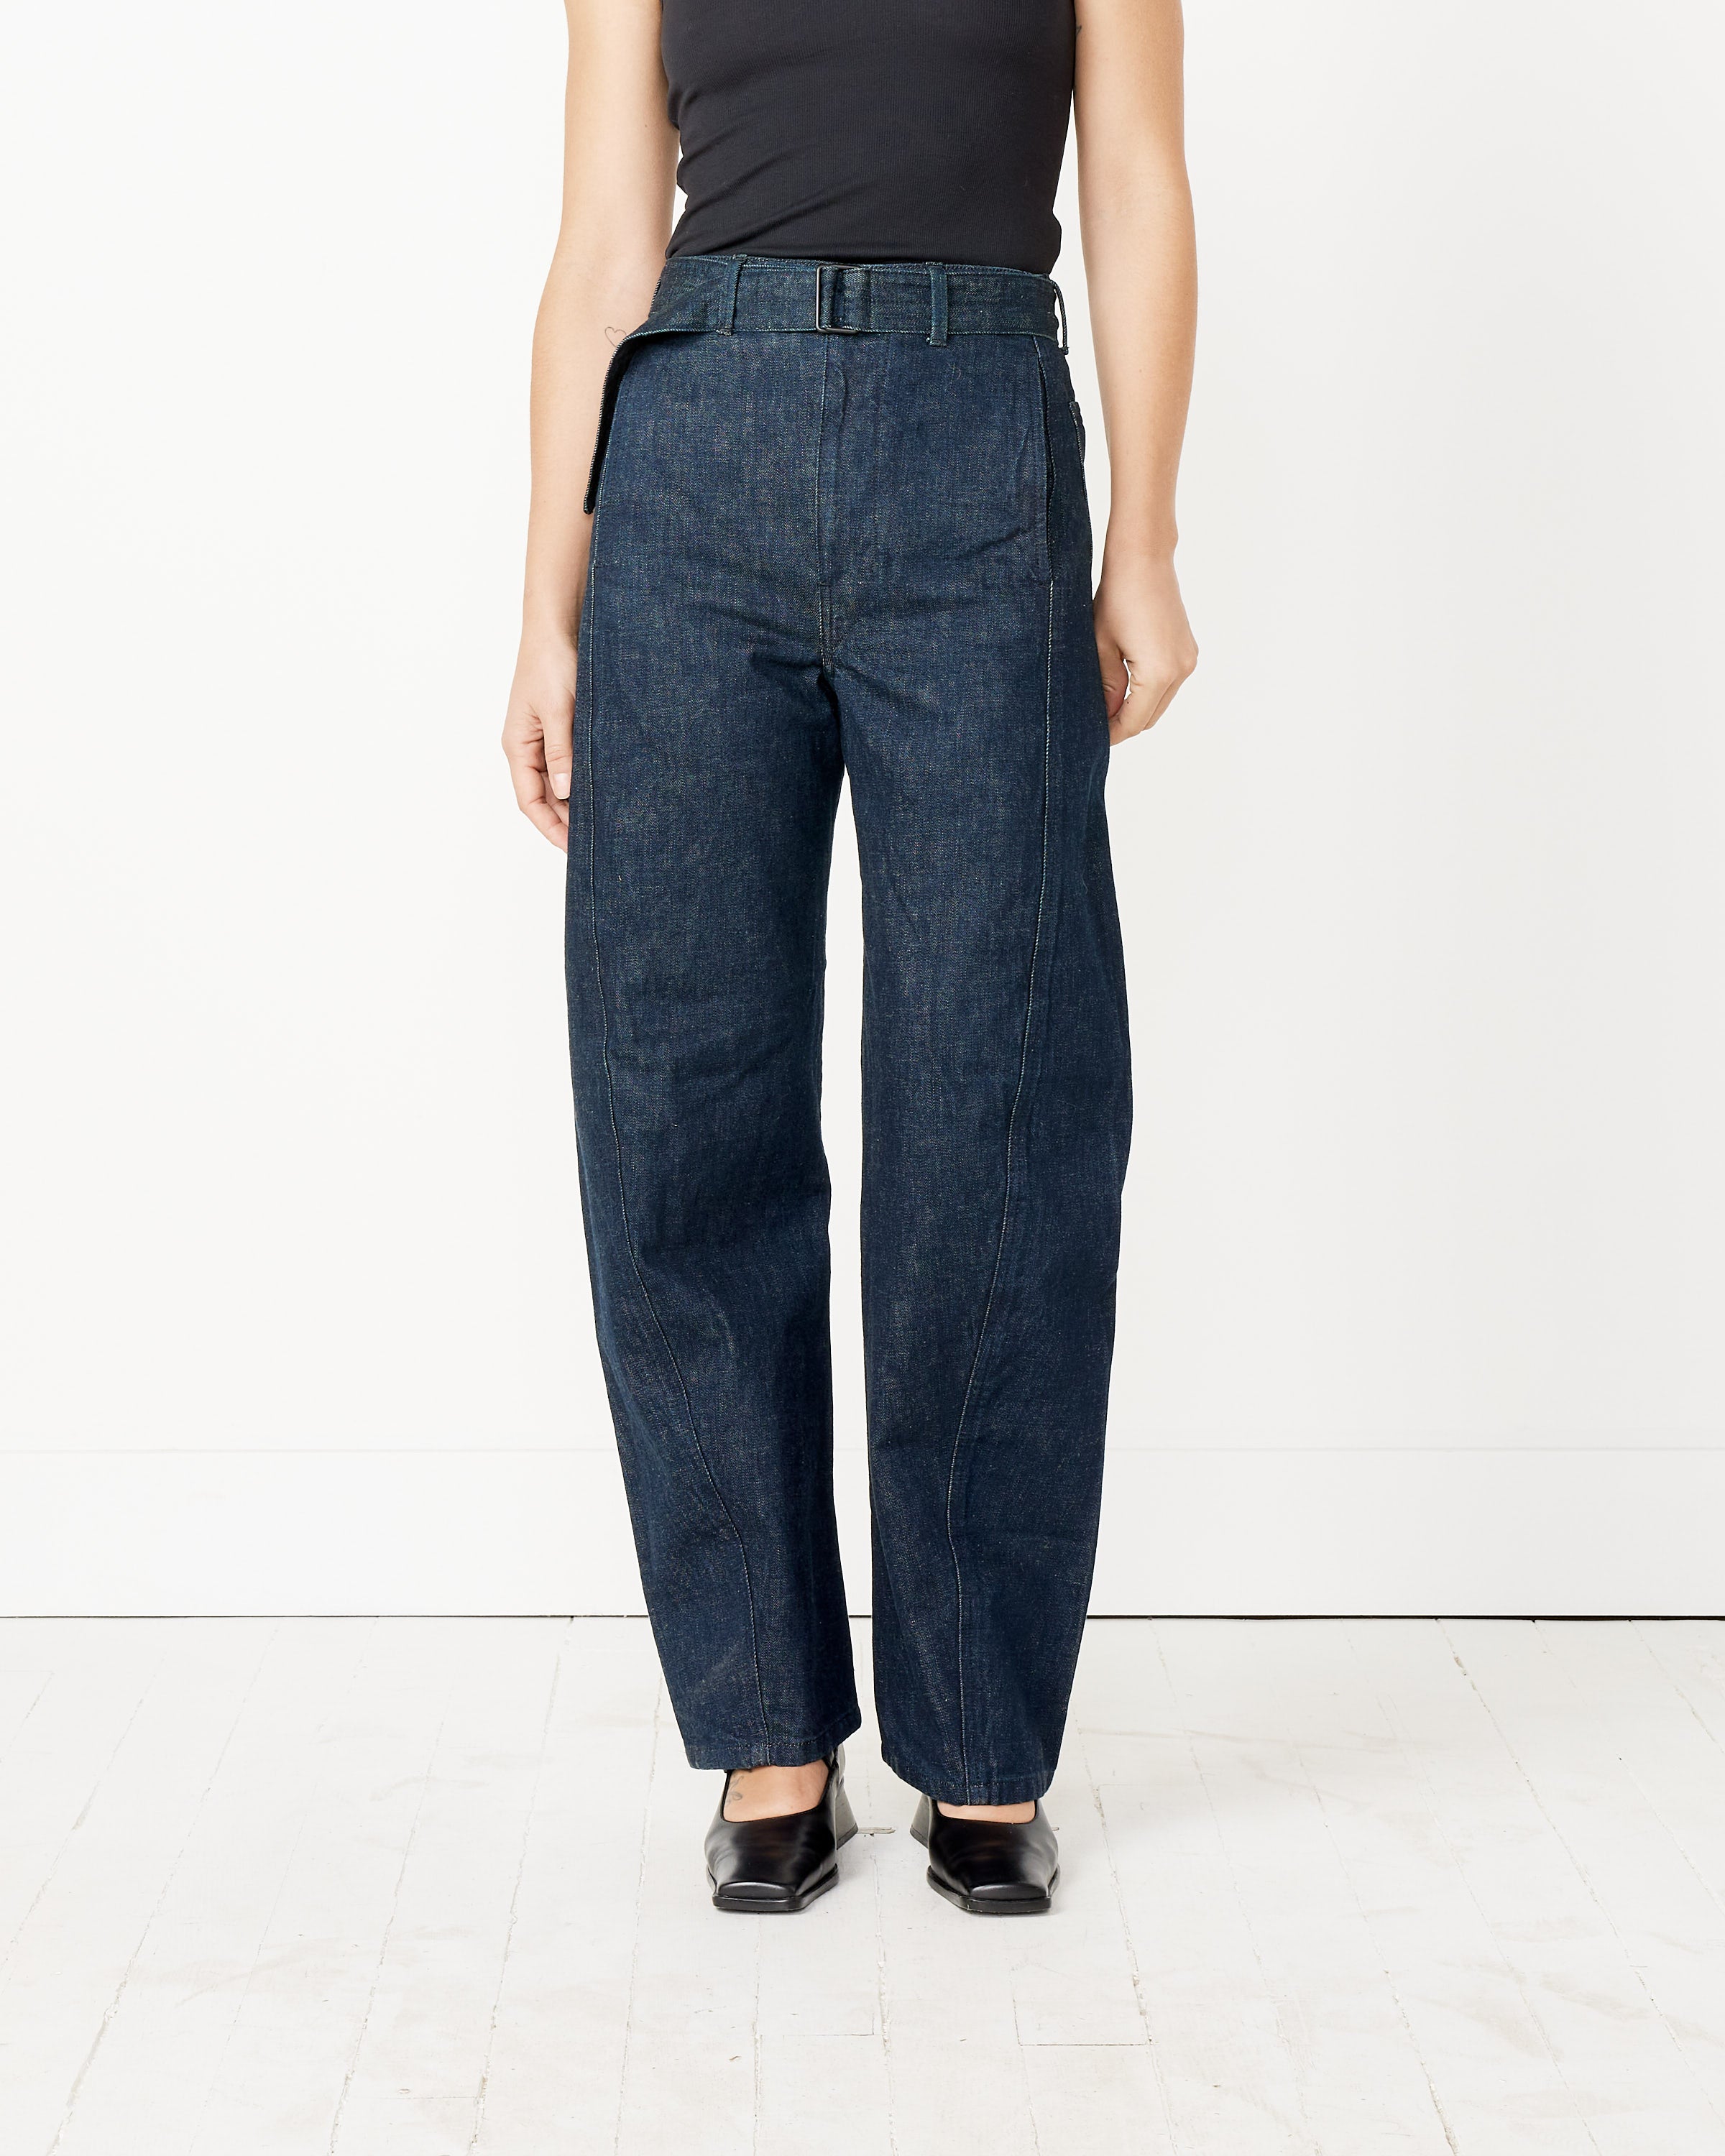 Mohawk General Store | Lemaire | Twisted Belted Pant in Denim Indigo